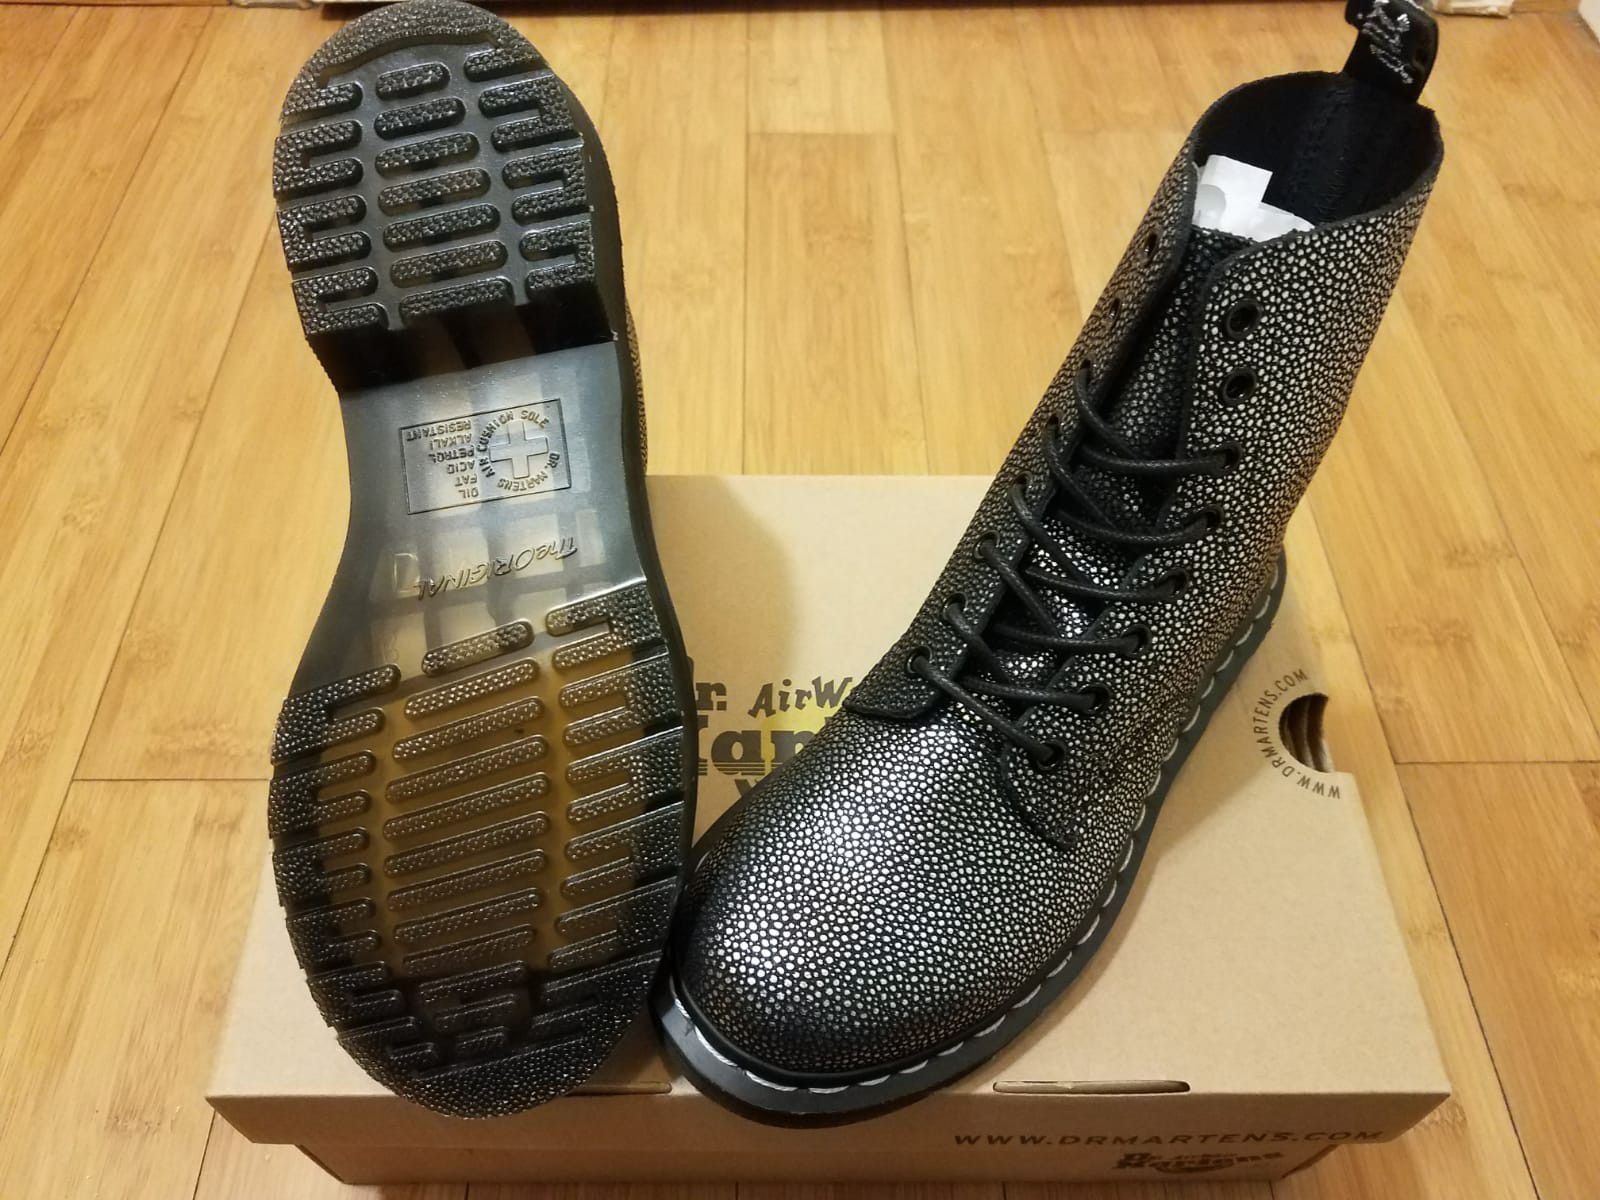 Dr Martens Boots size 7 in women